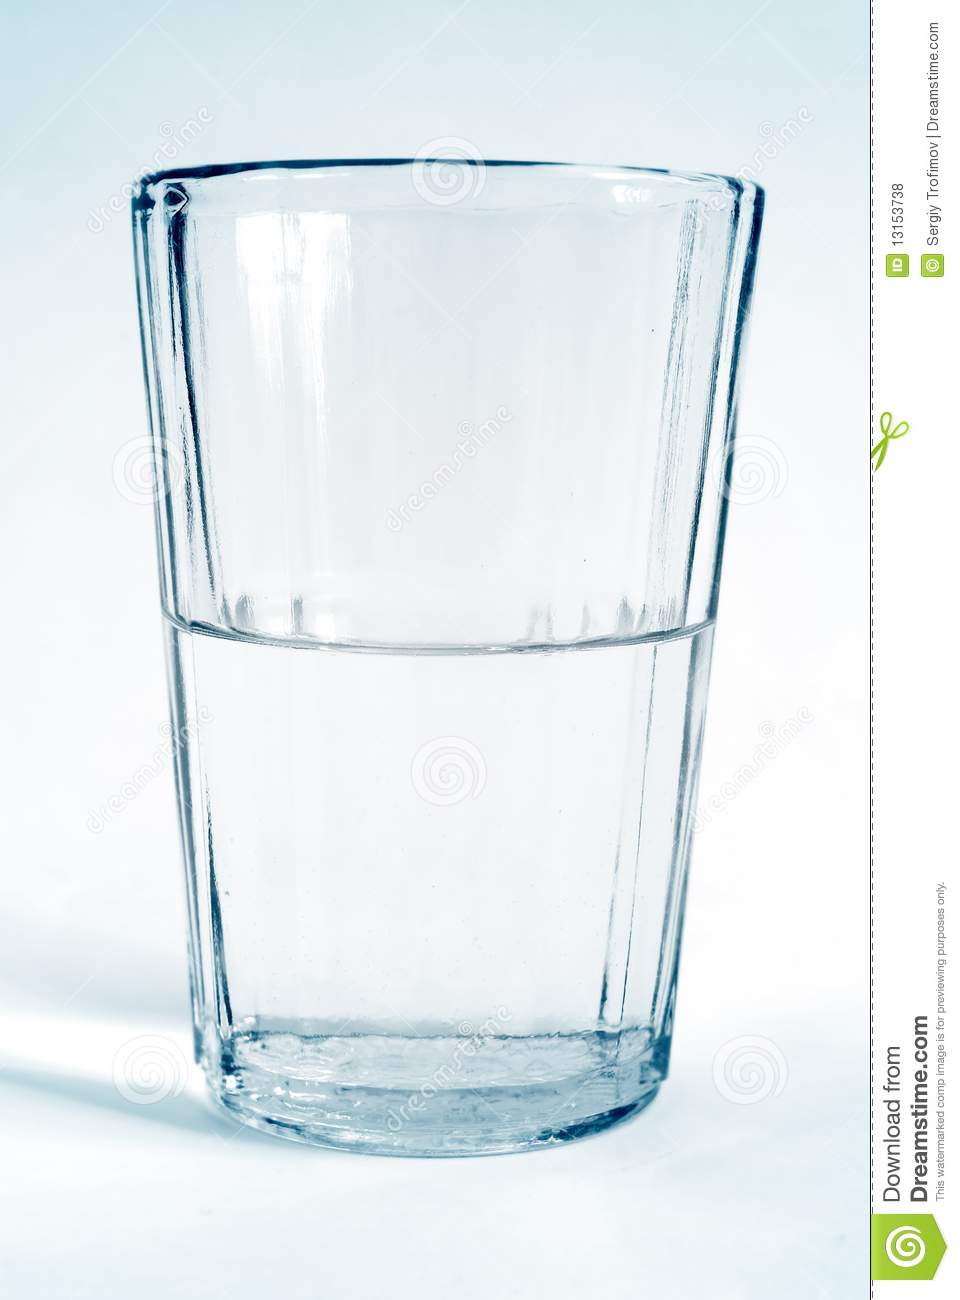 Glass Transparent Cup With Water Royalty Free Stock Photos   Image